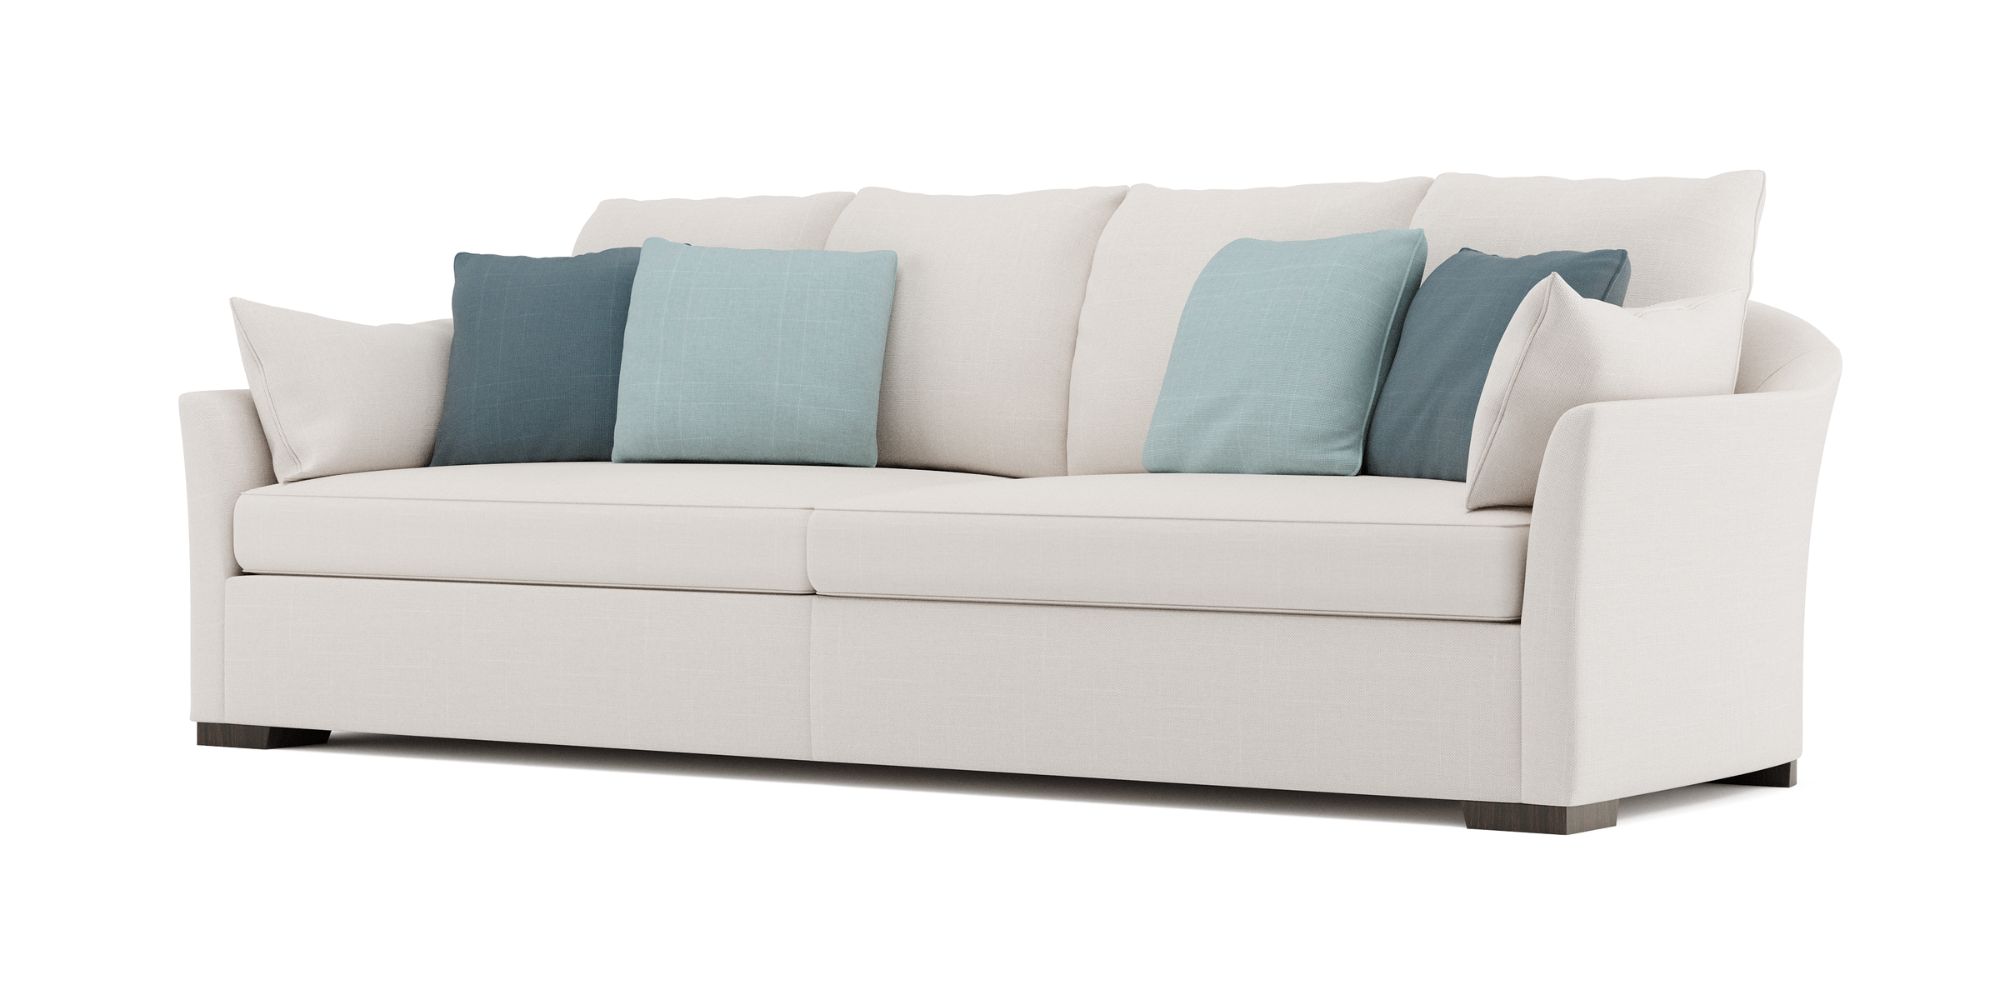 Chuchumber 2 Seater Sofa in Outdoor Sofas for Chuchumber collection